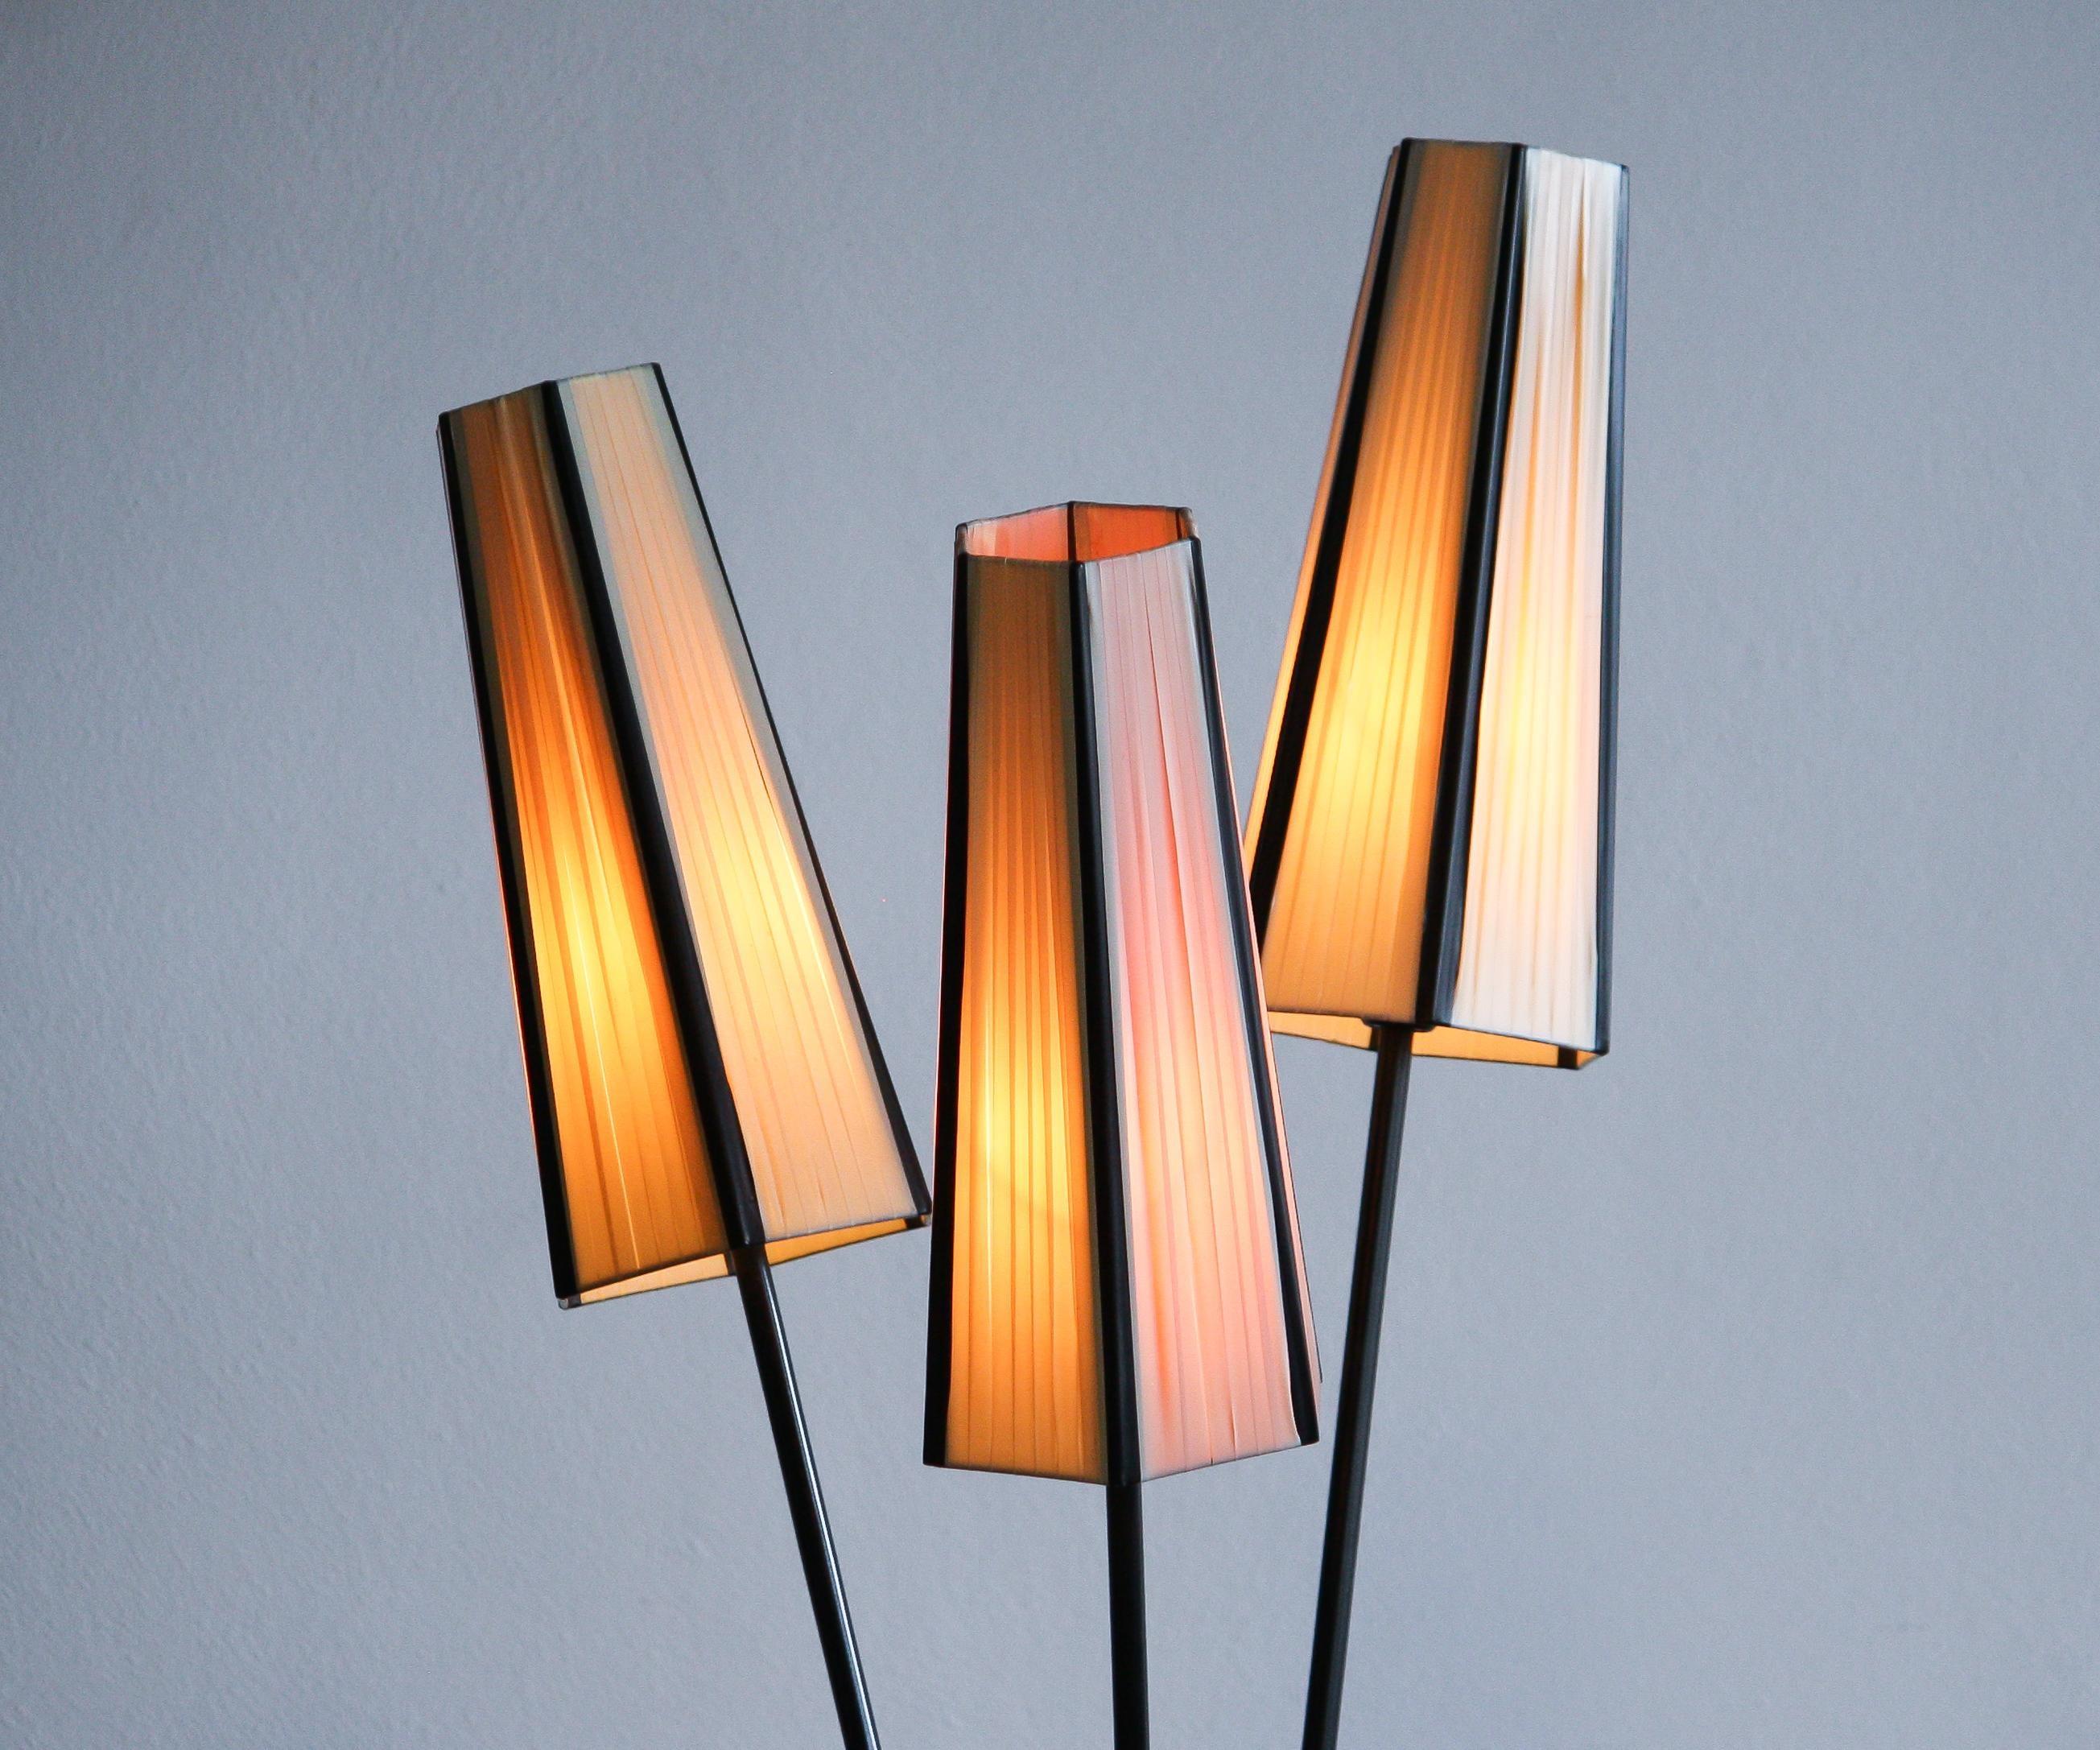 Floor lamp with two off-white and one salmon polyester fabrics covers from the 1950s.
The caps are lined with black cords.
The lamp stands on a black metal three-leg rest standard and the caps on brass rods. It is in good condition.
Period